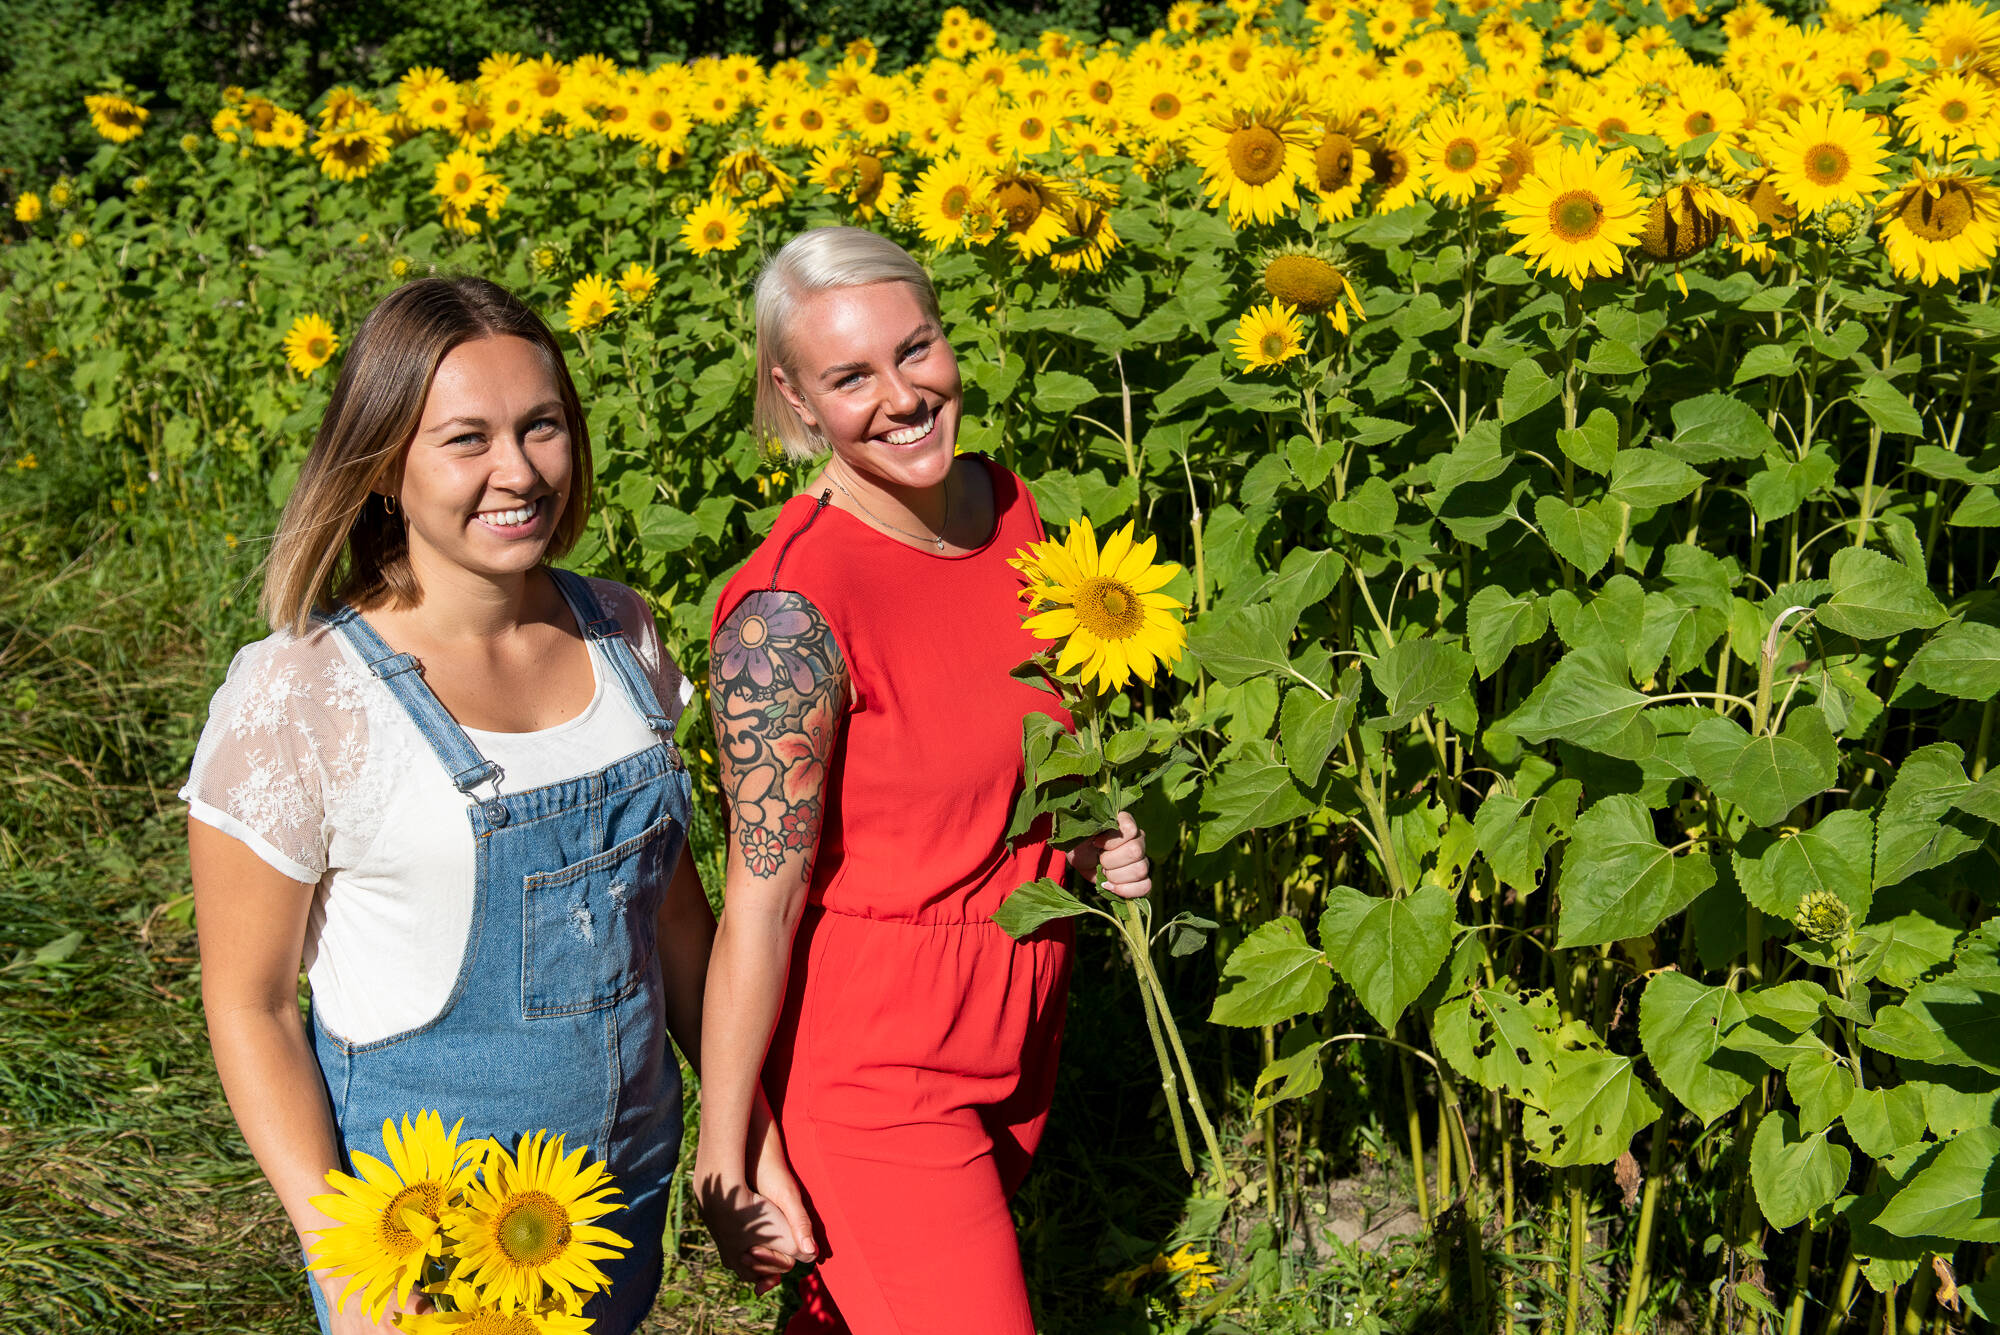 Two women standing by a sunflower field smiling at the camera.